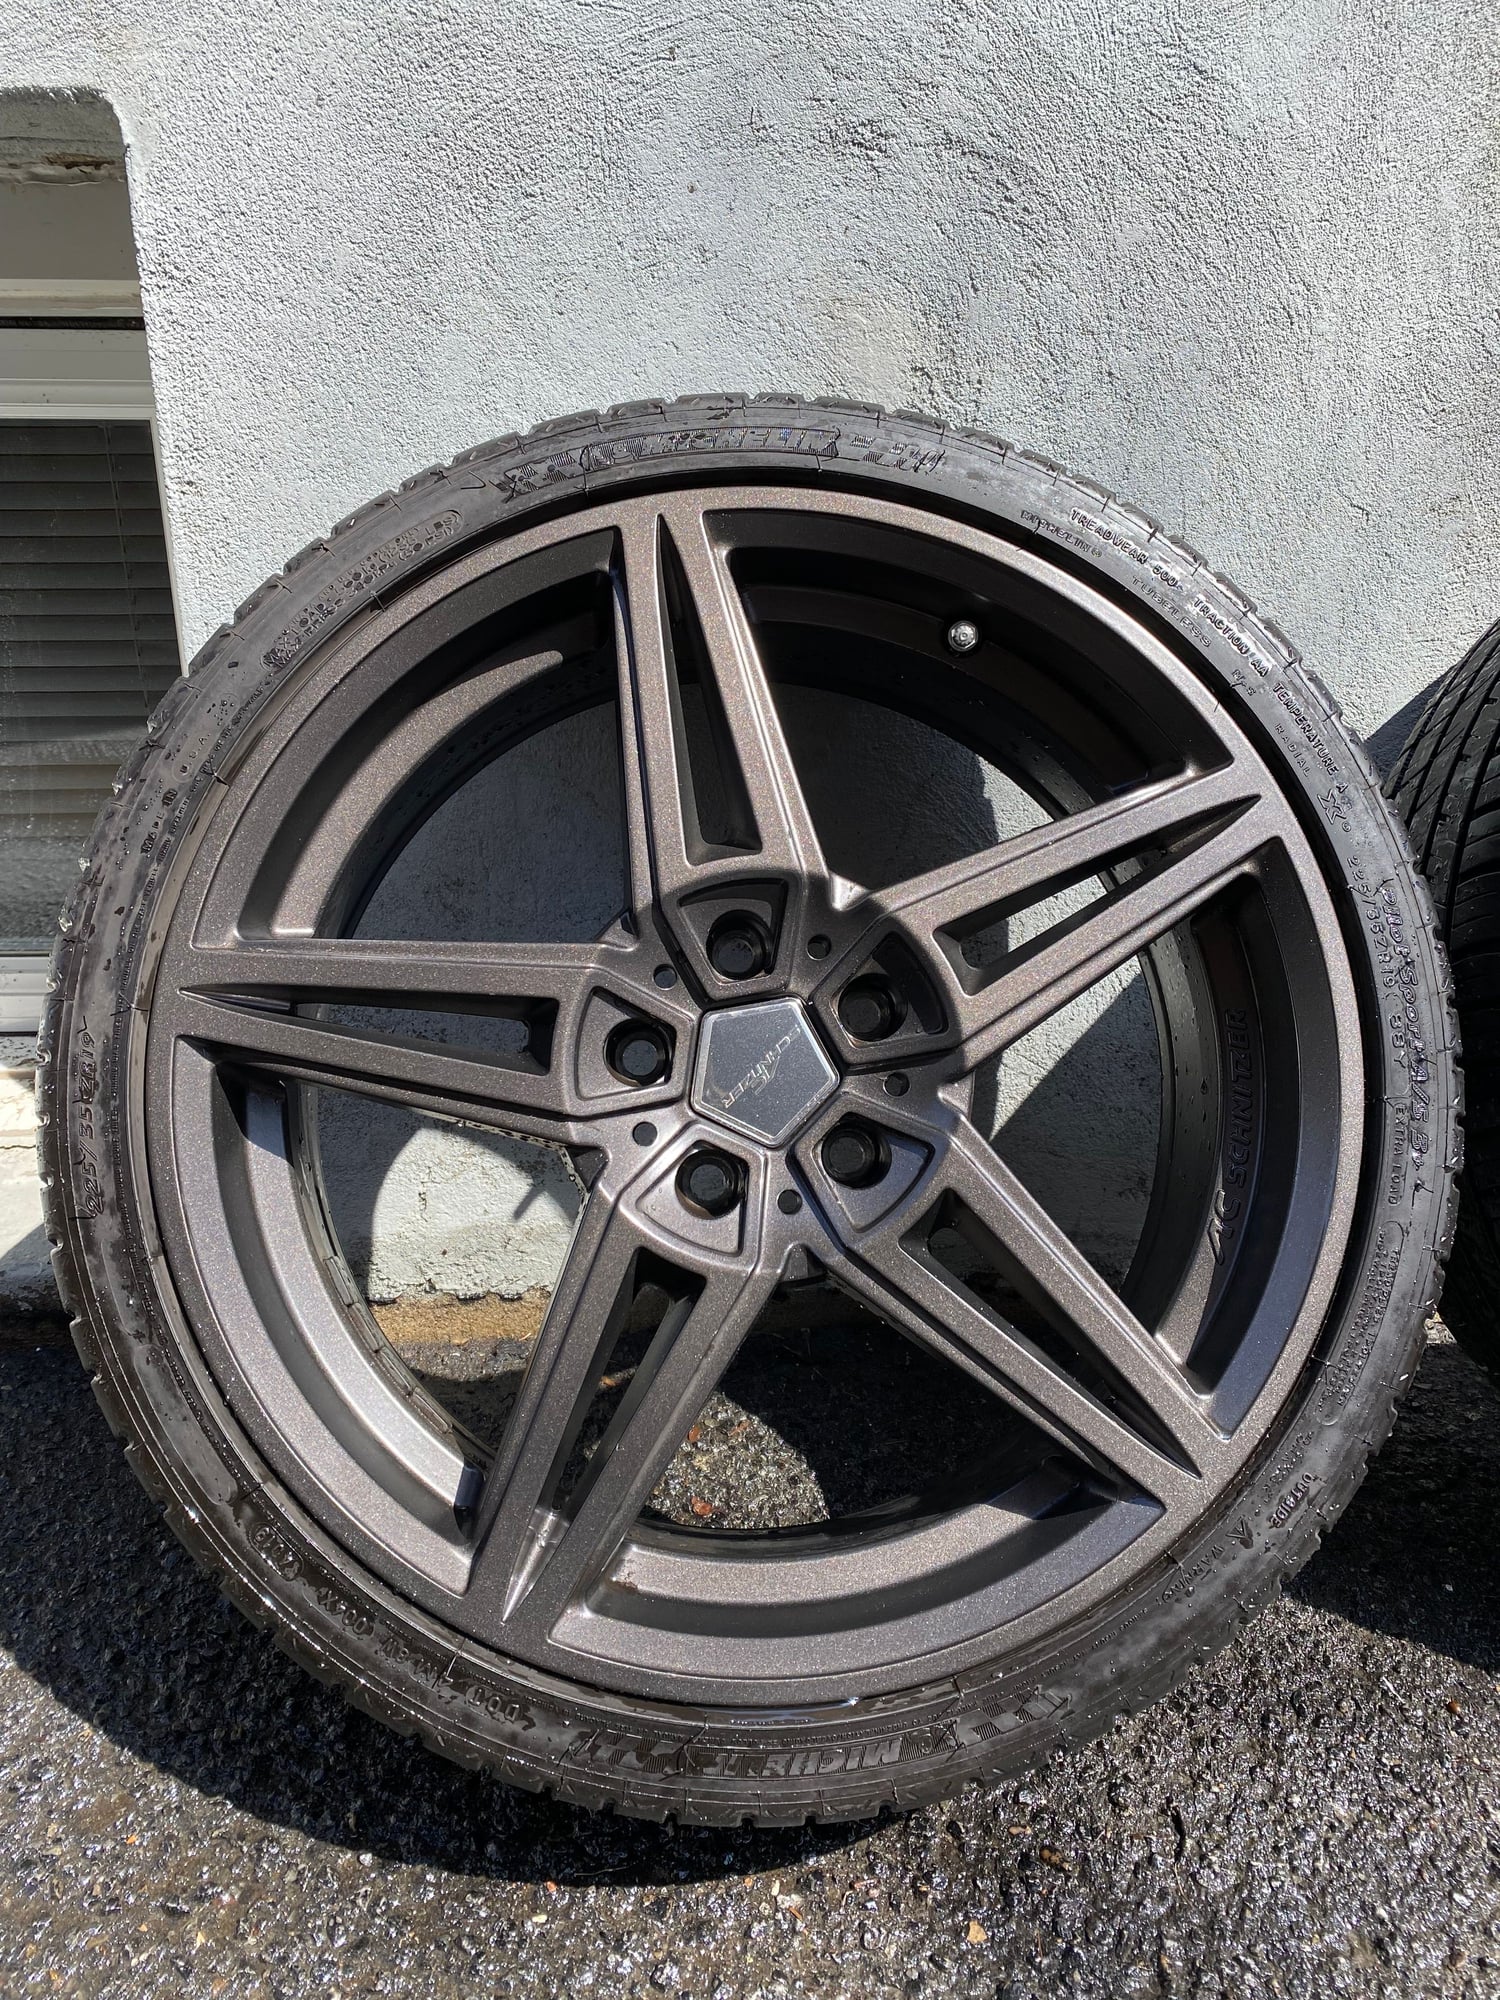 Wheels and Tires/Axles - Rare AC Schnitzer AC1, 19” in anthracite - Used - All Years  All Models - Montreal West, QC H4X1G8, Canada